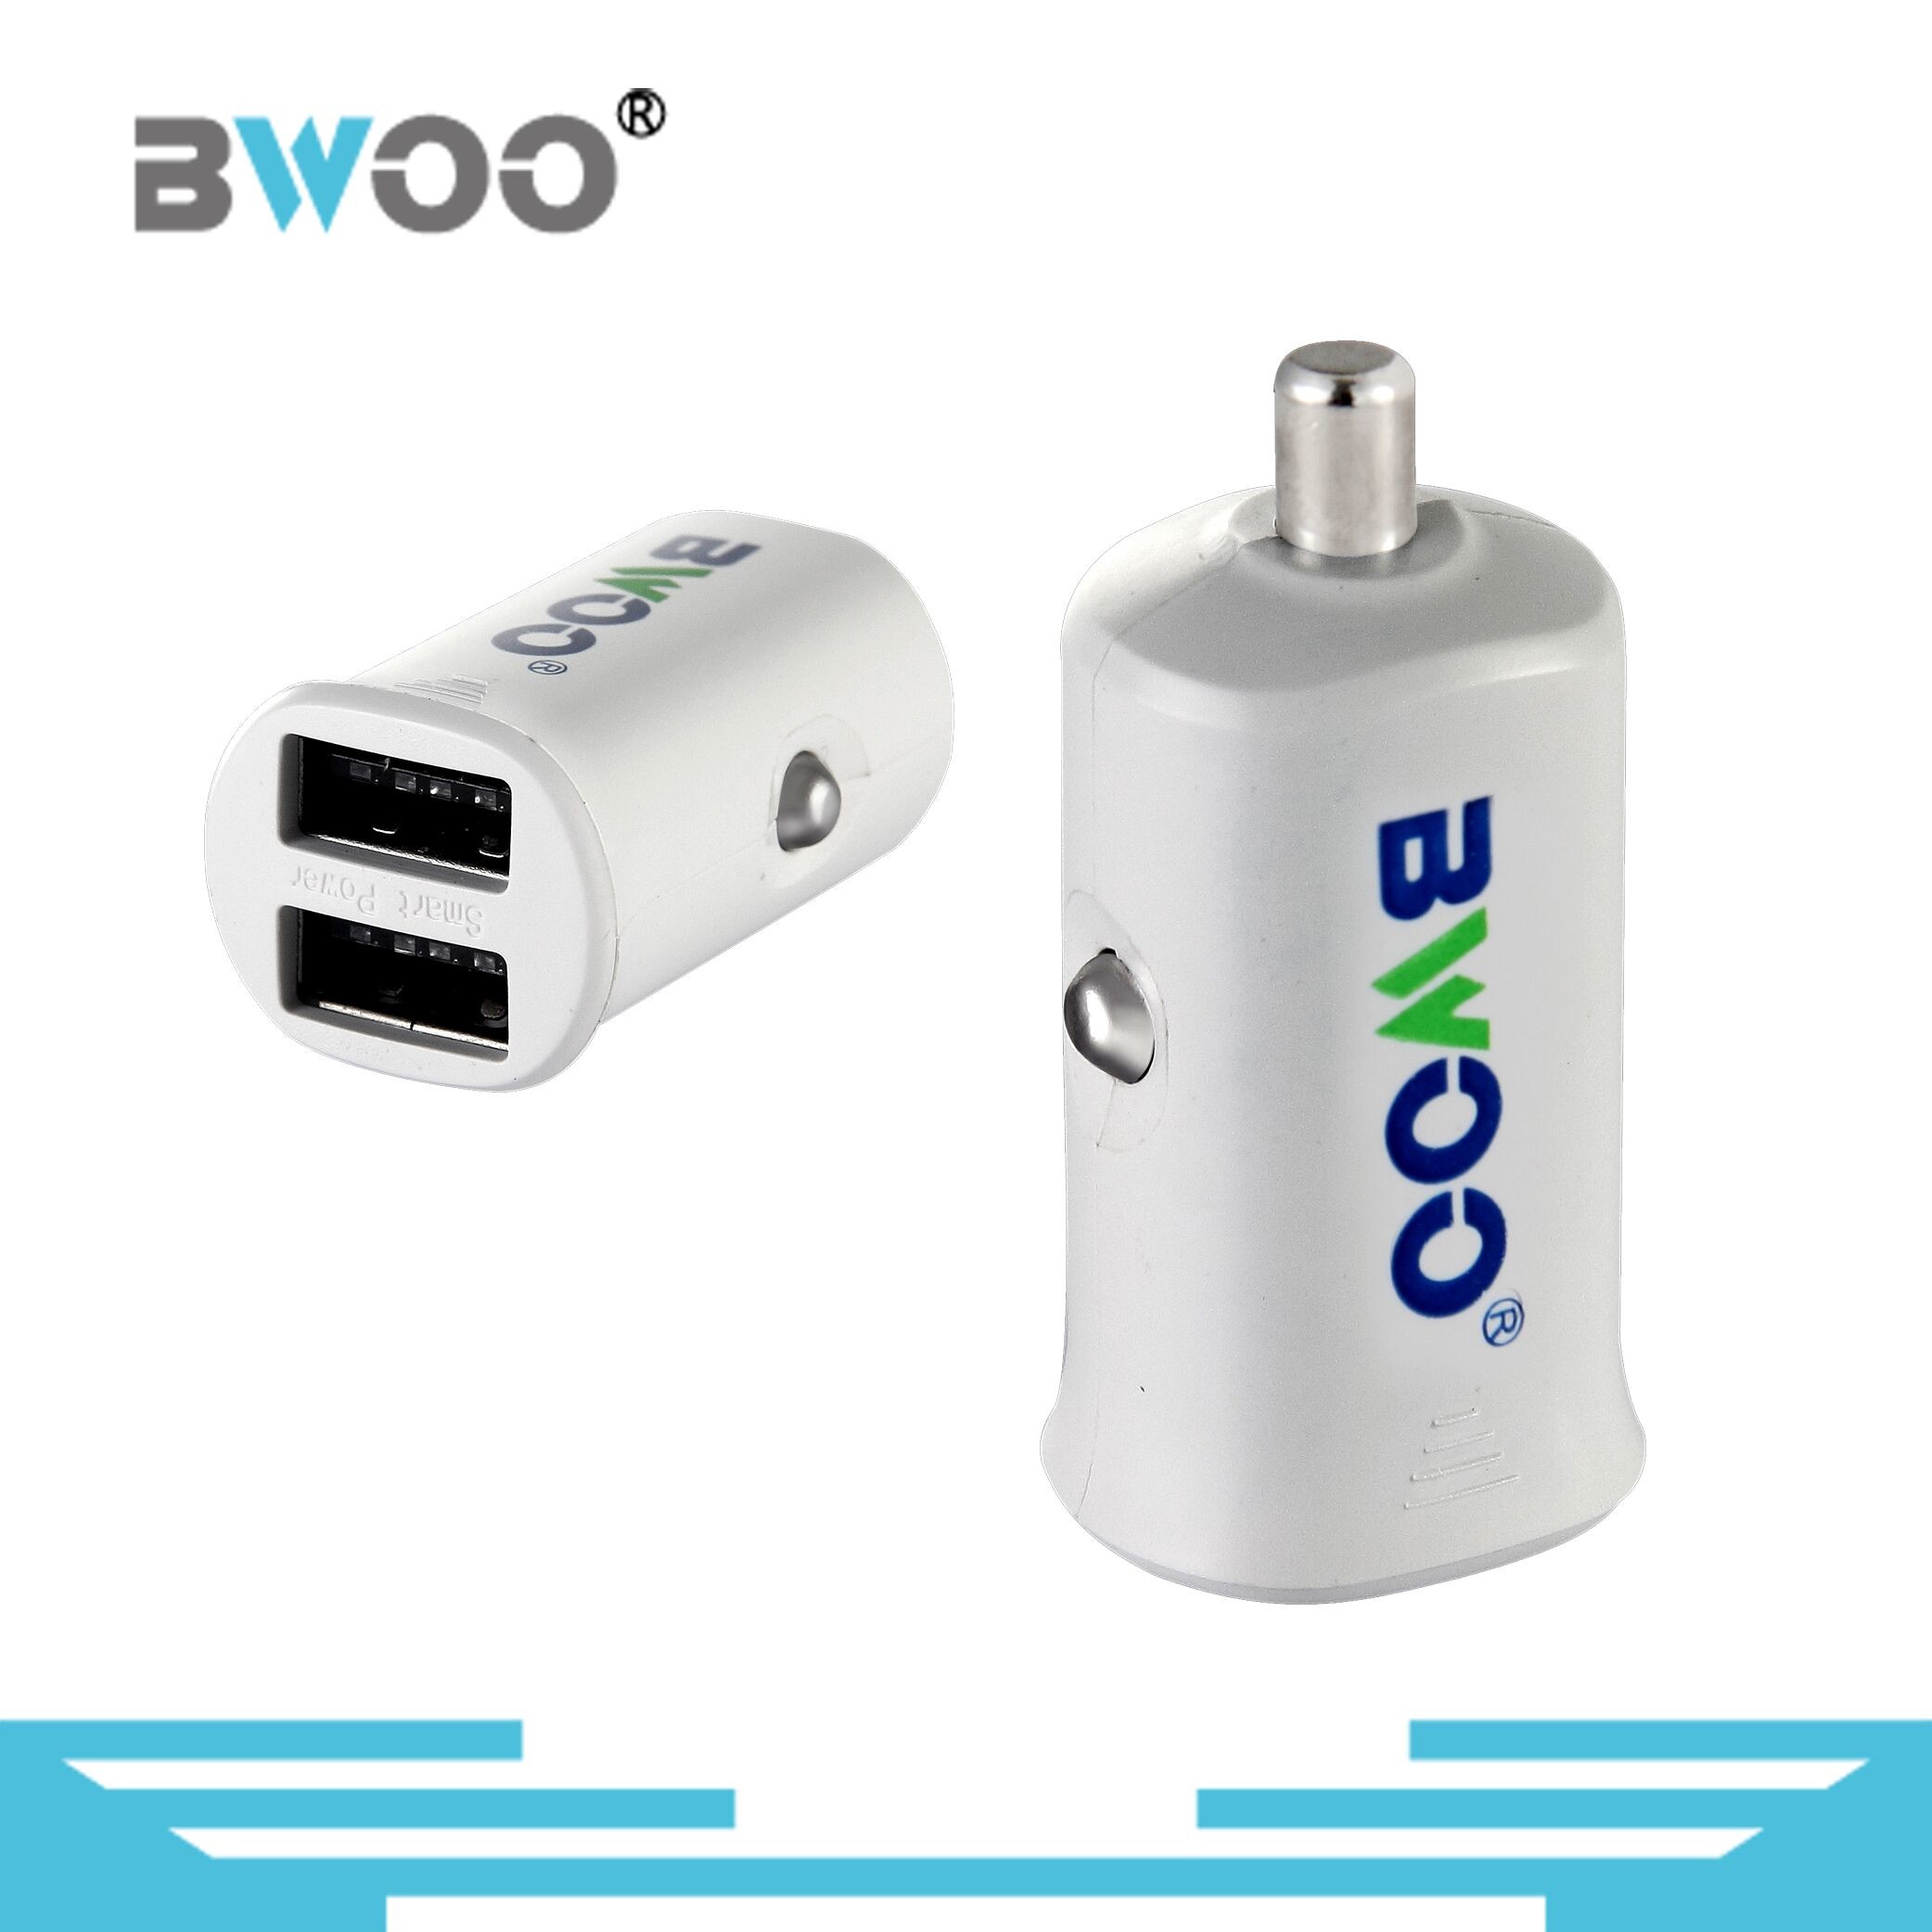 Bwoo Mini Size Dual USB Car Charger with Indicator Light Inside Output 5V 2.1A